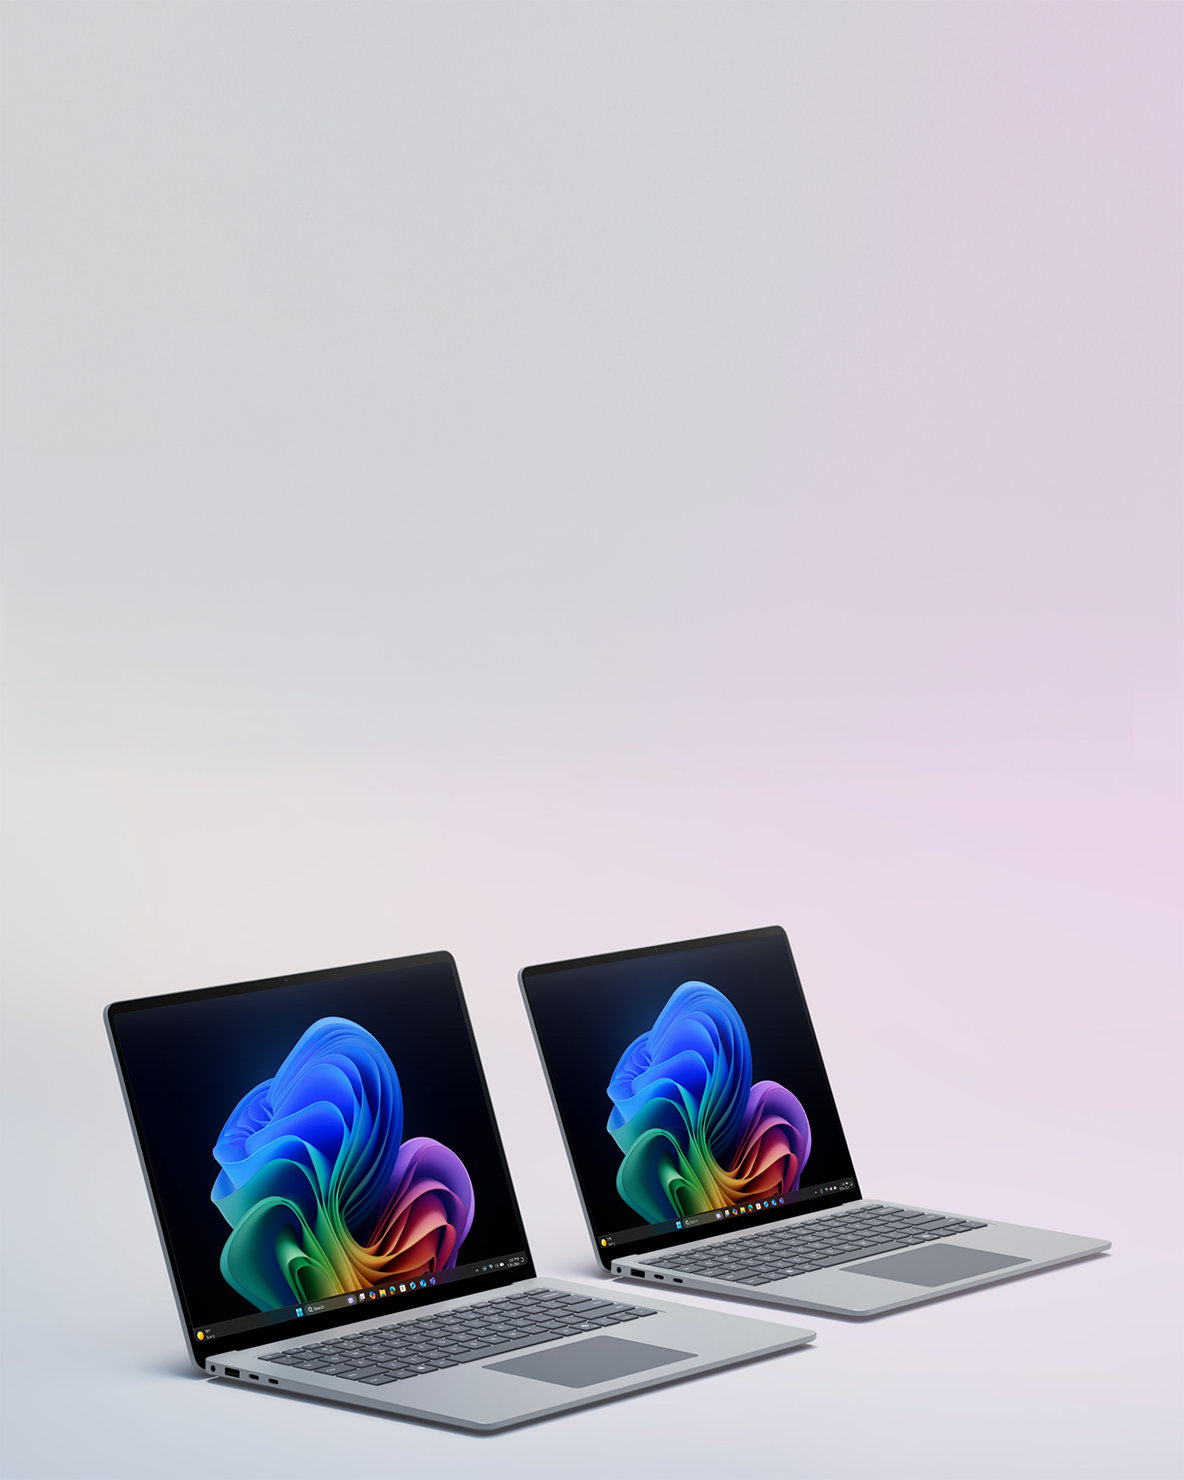 An image of two Surface Laptop devices sitting side by side